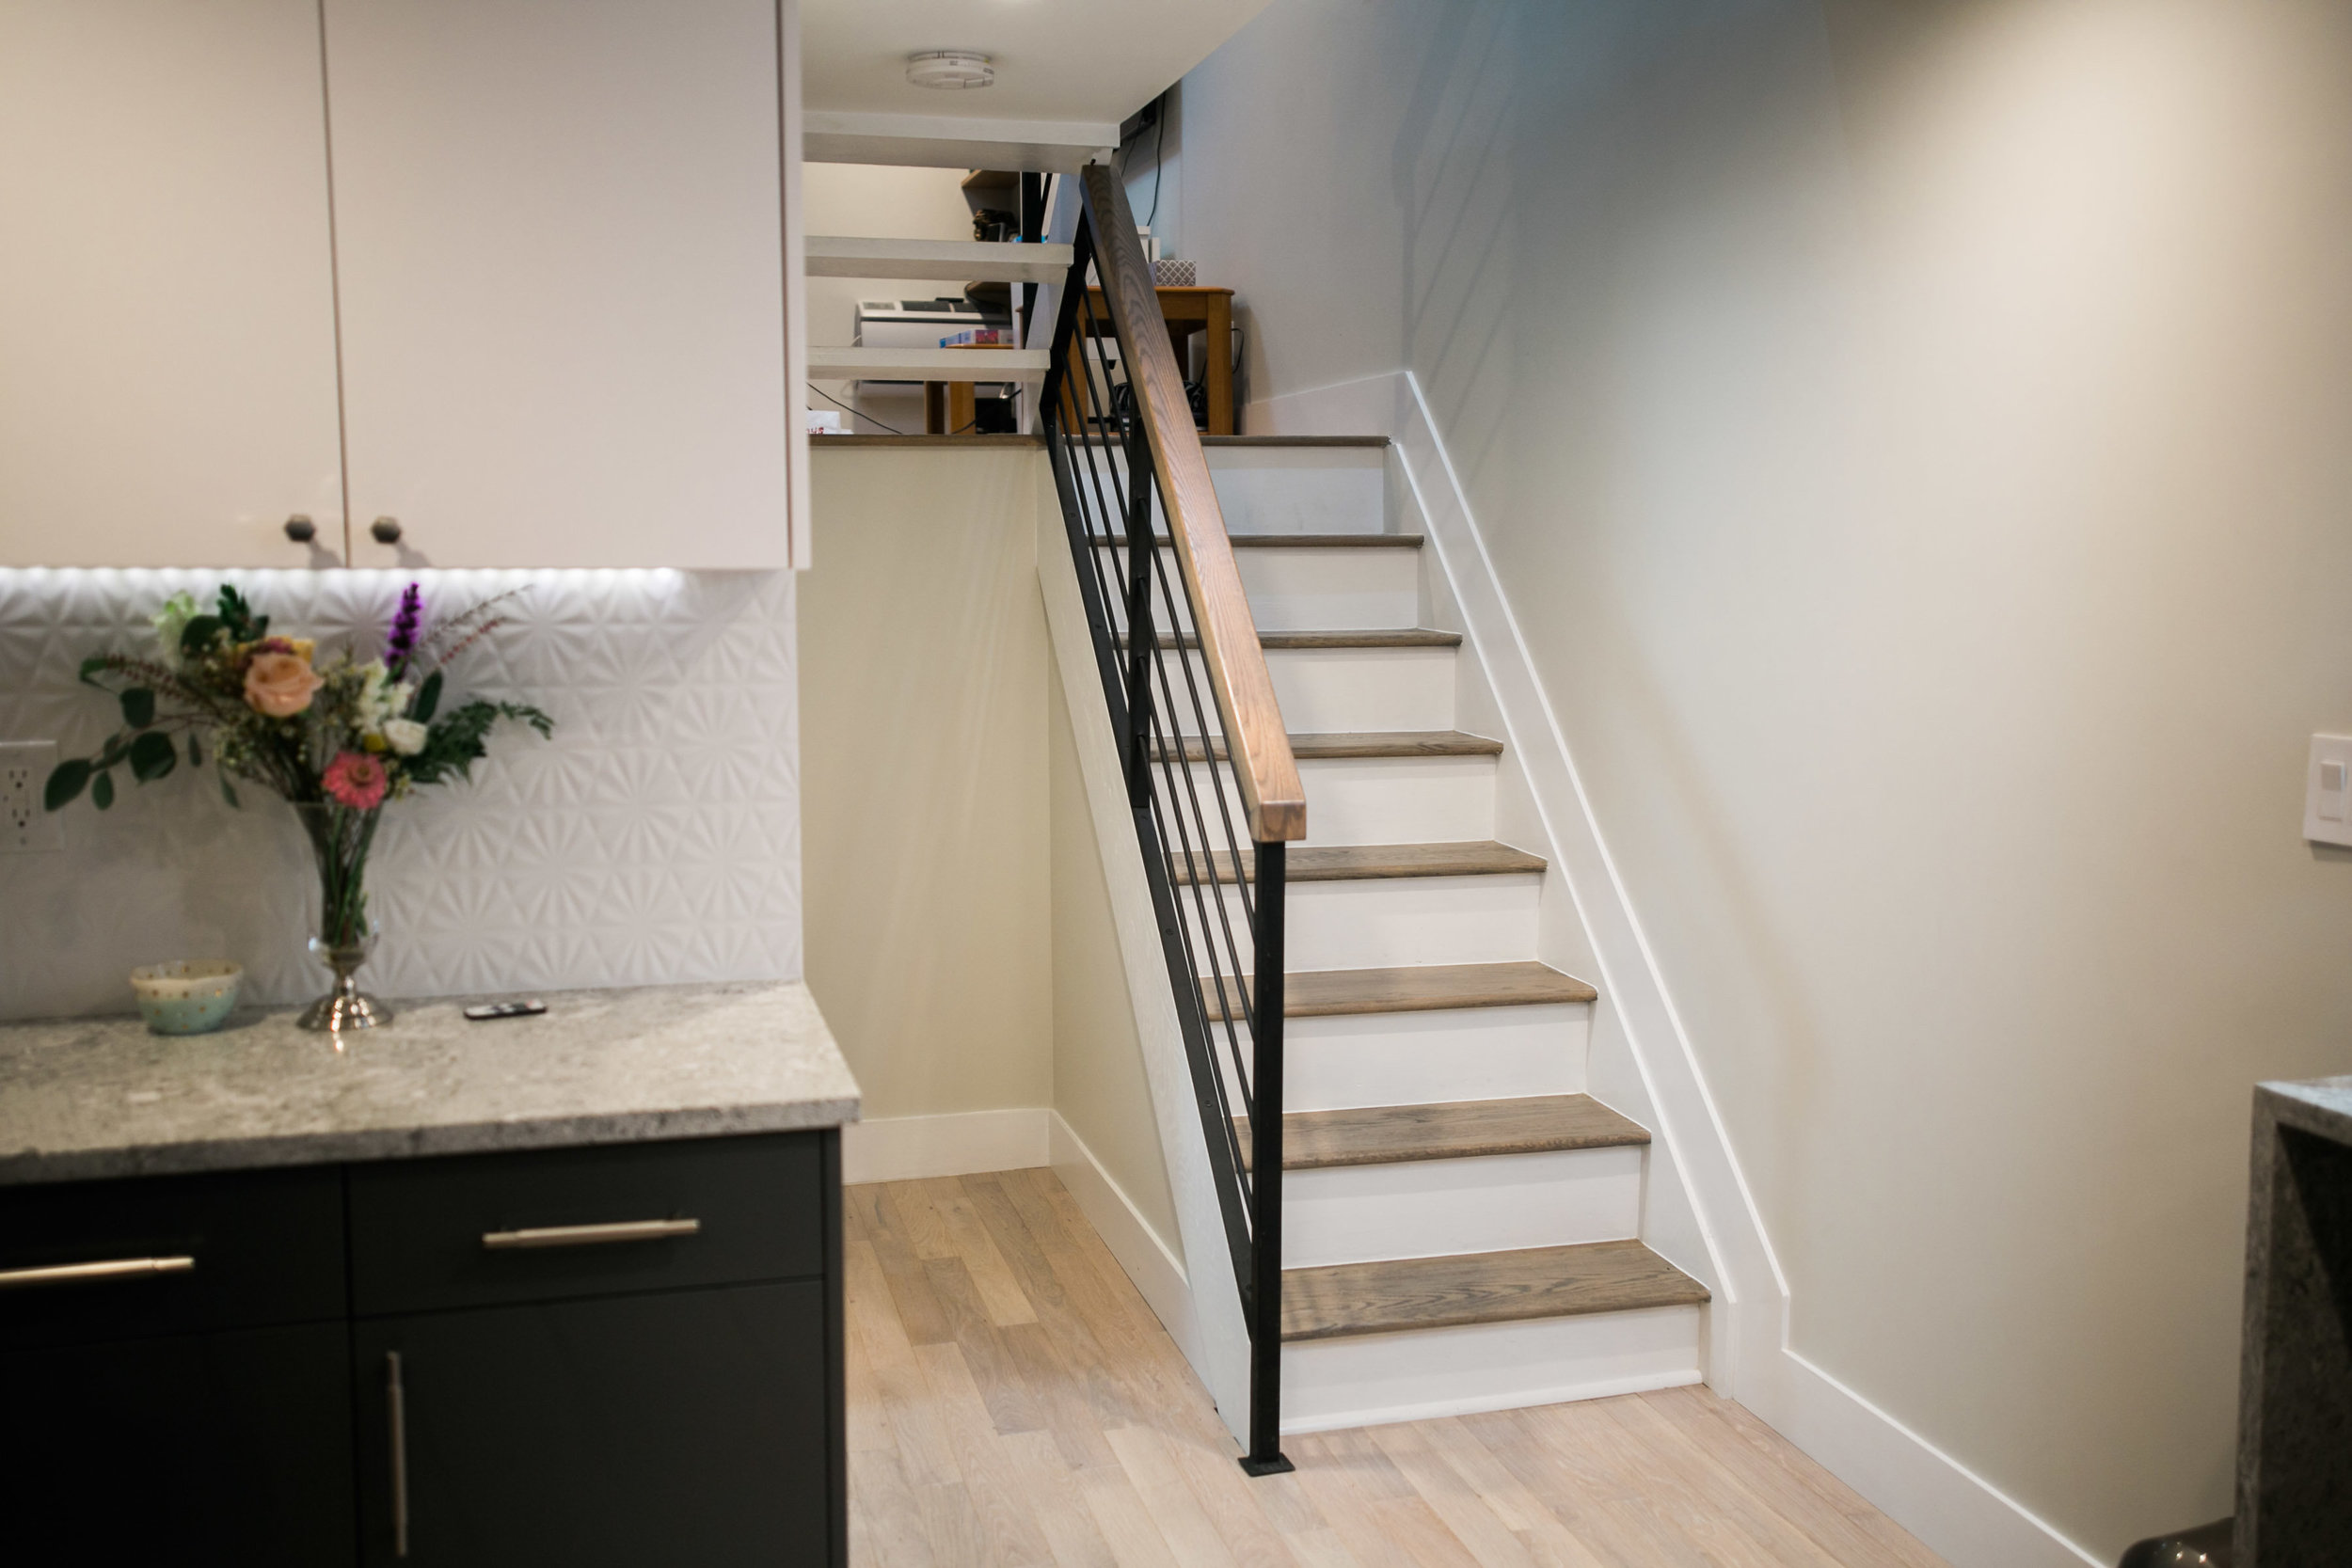 Location2_Staircase_005.jpg